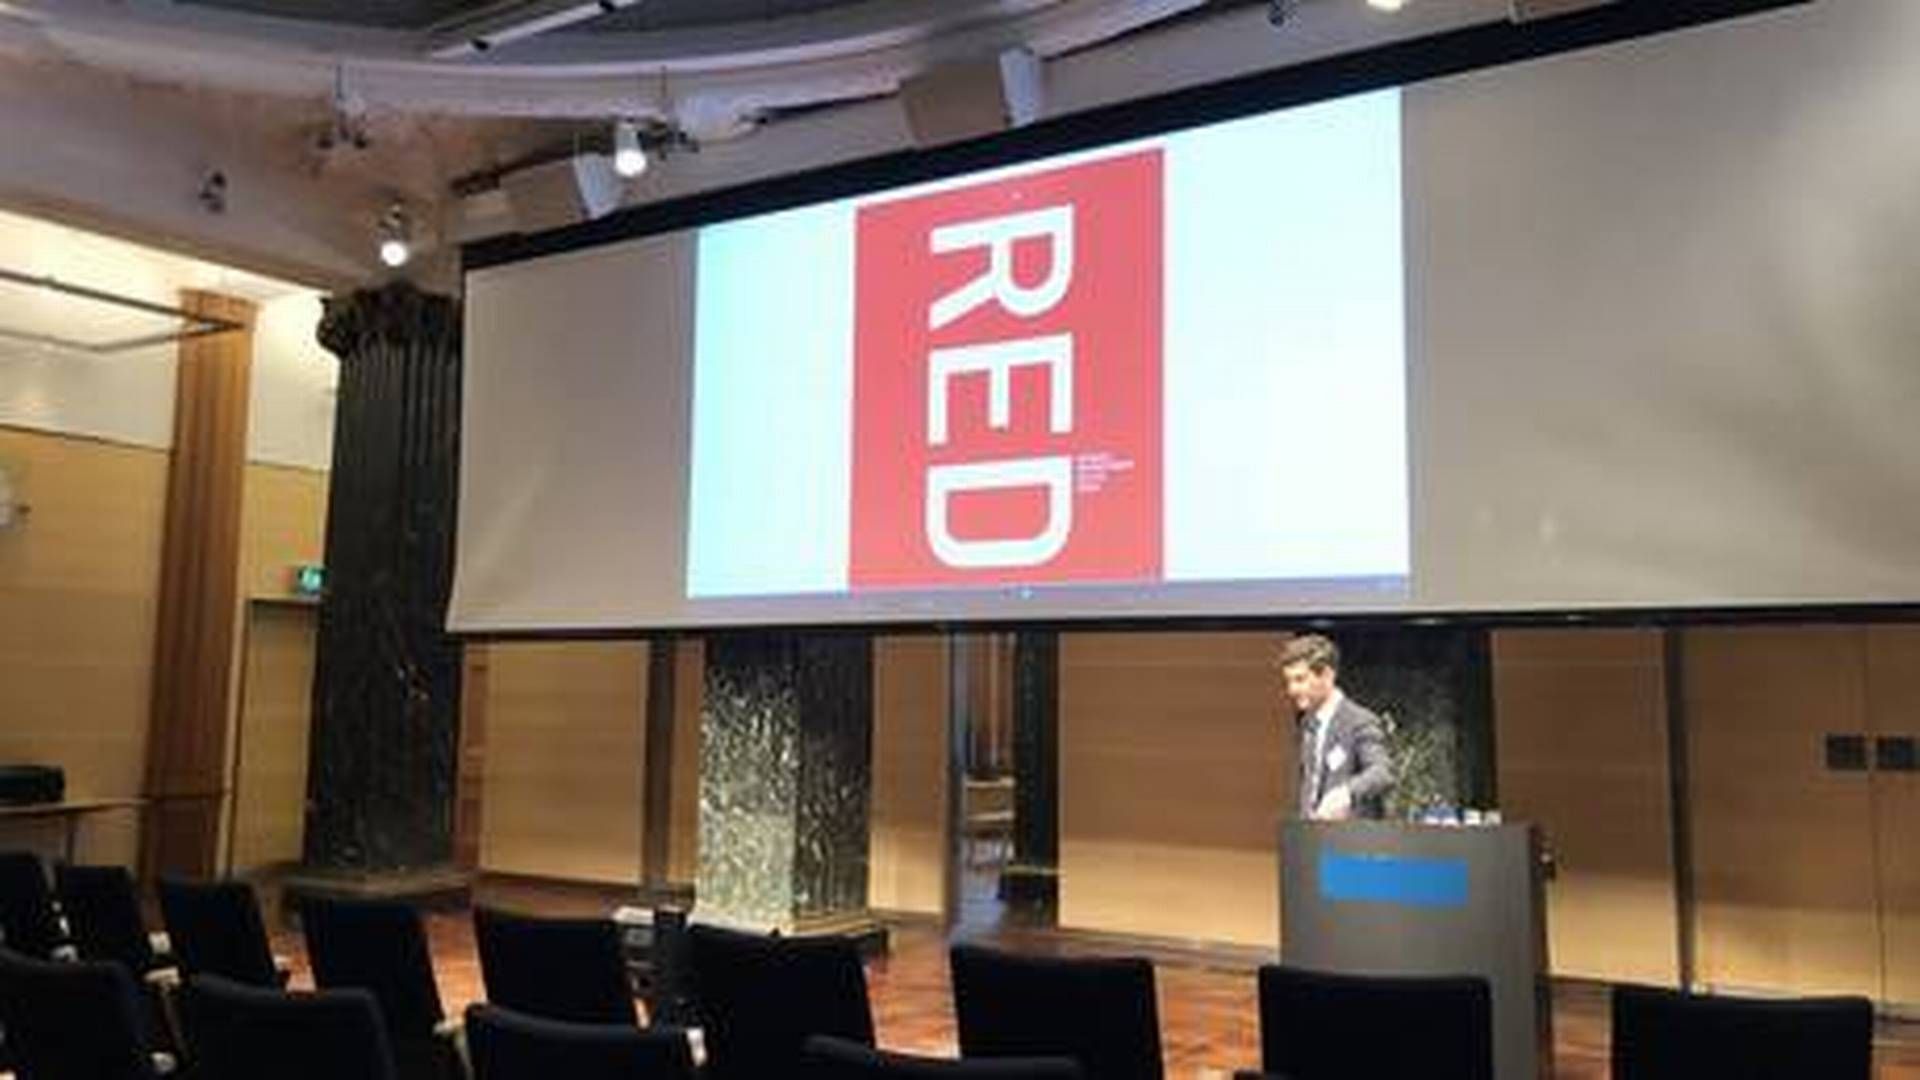 Nicholas Thurø, leading partner at Cushman & Wakefield Red, gave a presentation about the firm's 2020 expectations on Tuesday. | Photo: Sacha Sennov